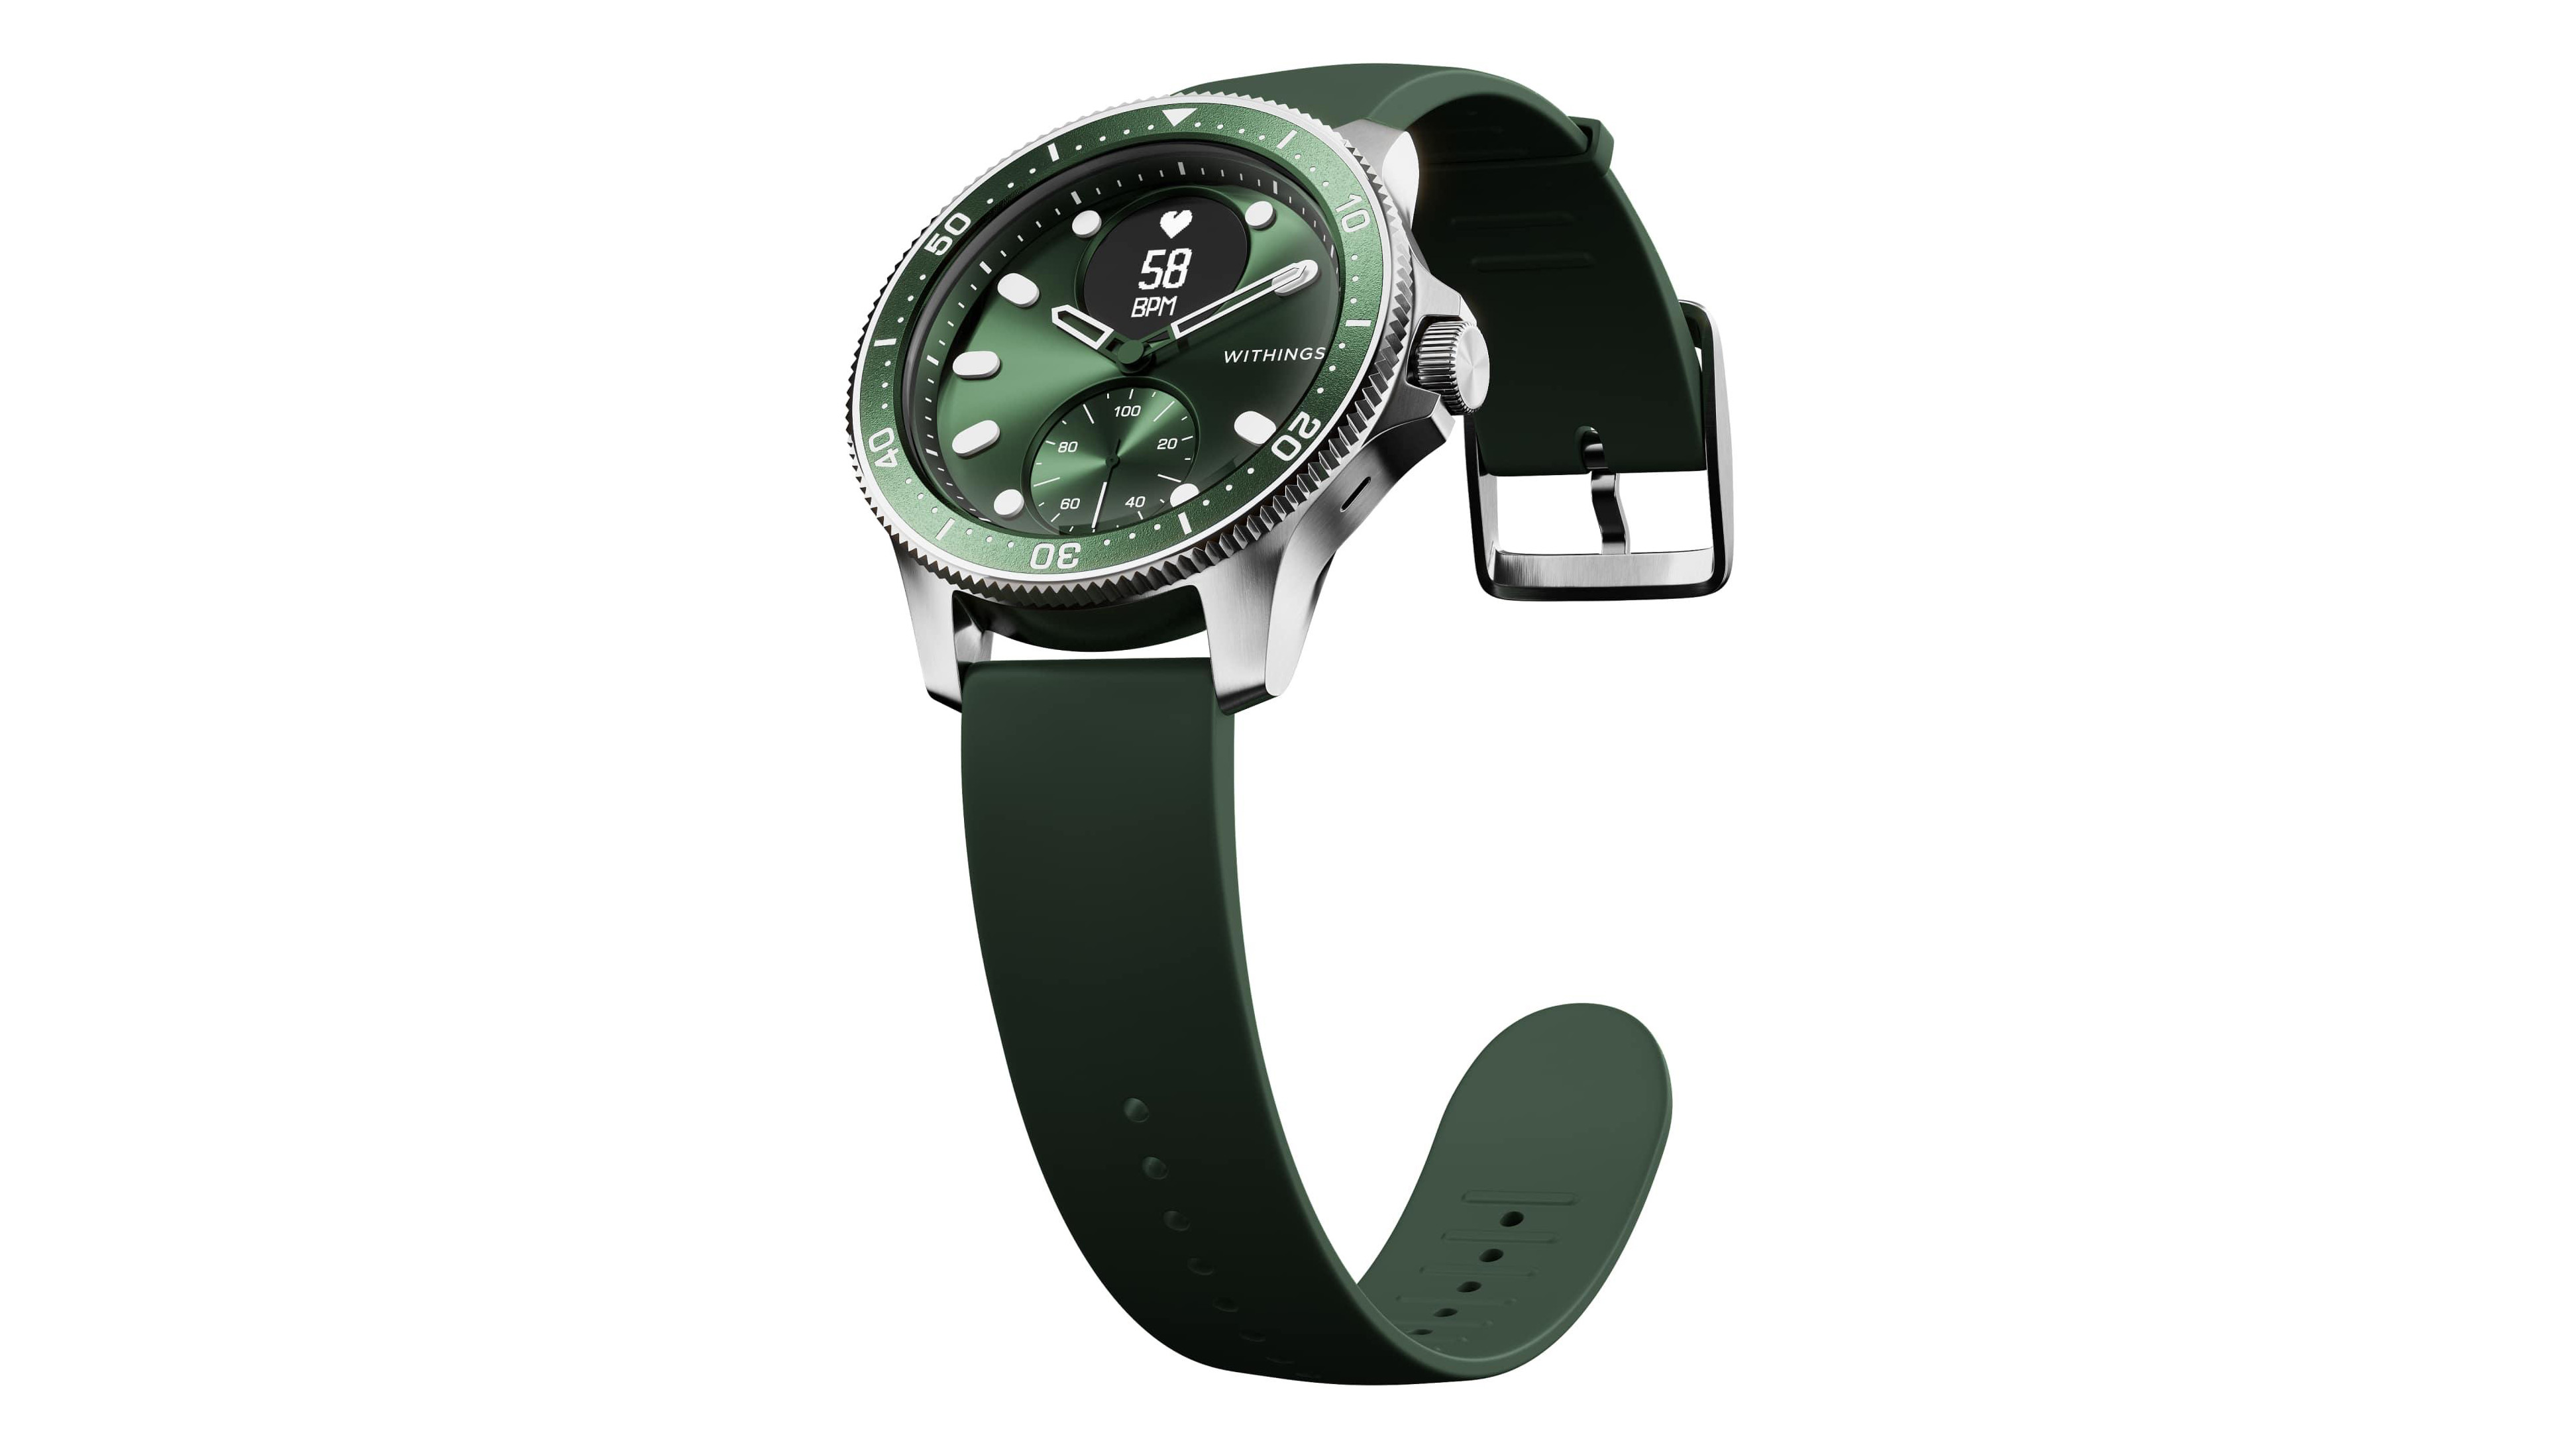 Withings ScanWatch Horizon, one of the best smartwatch for iPhones, against a white background